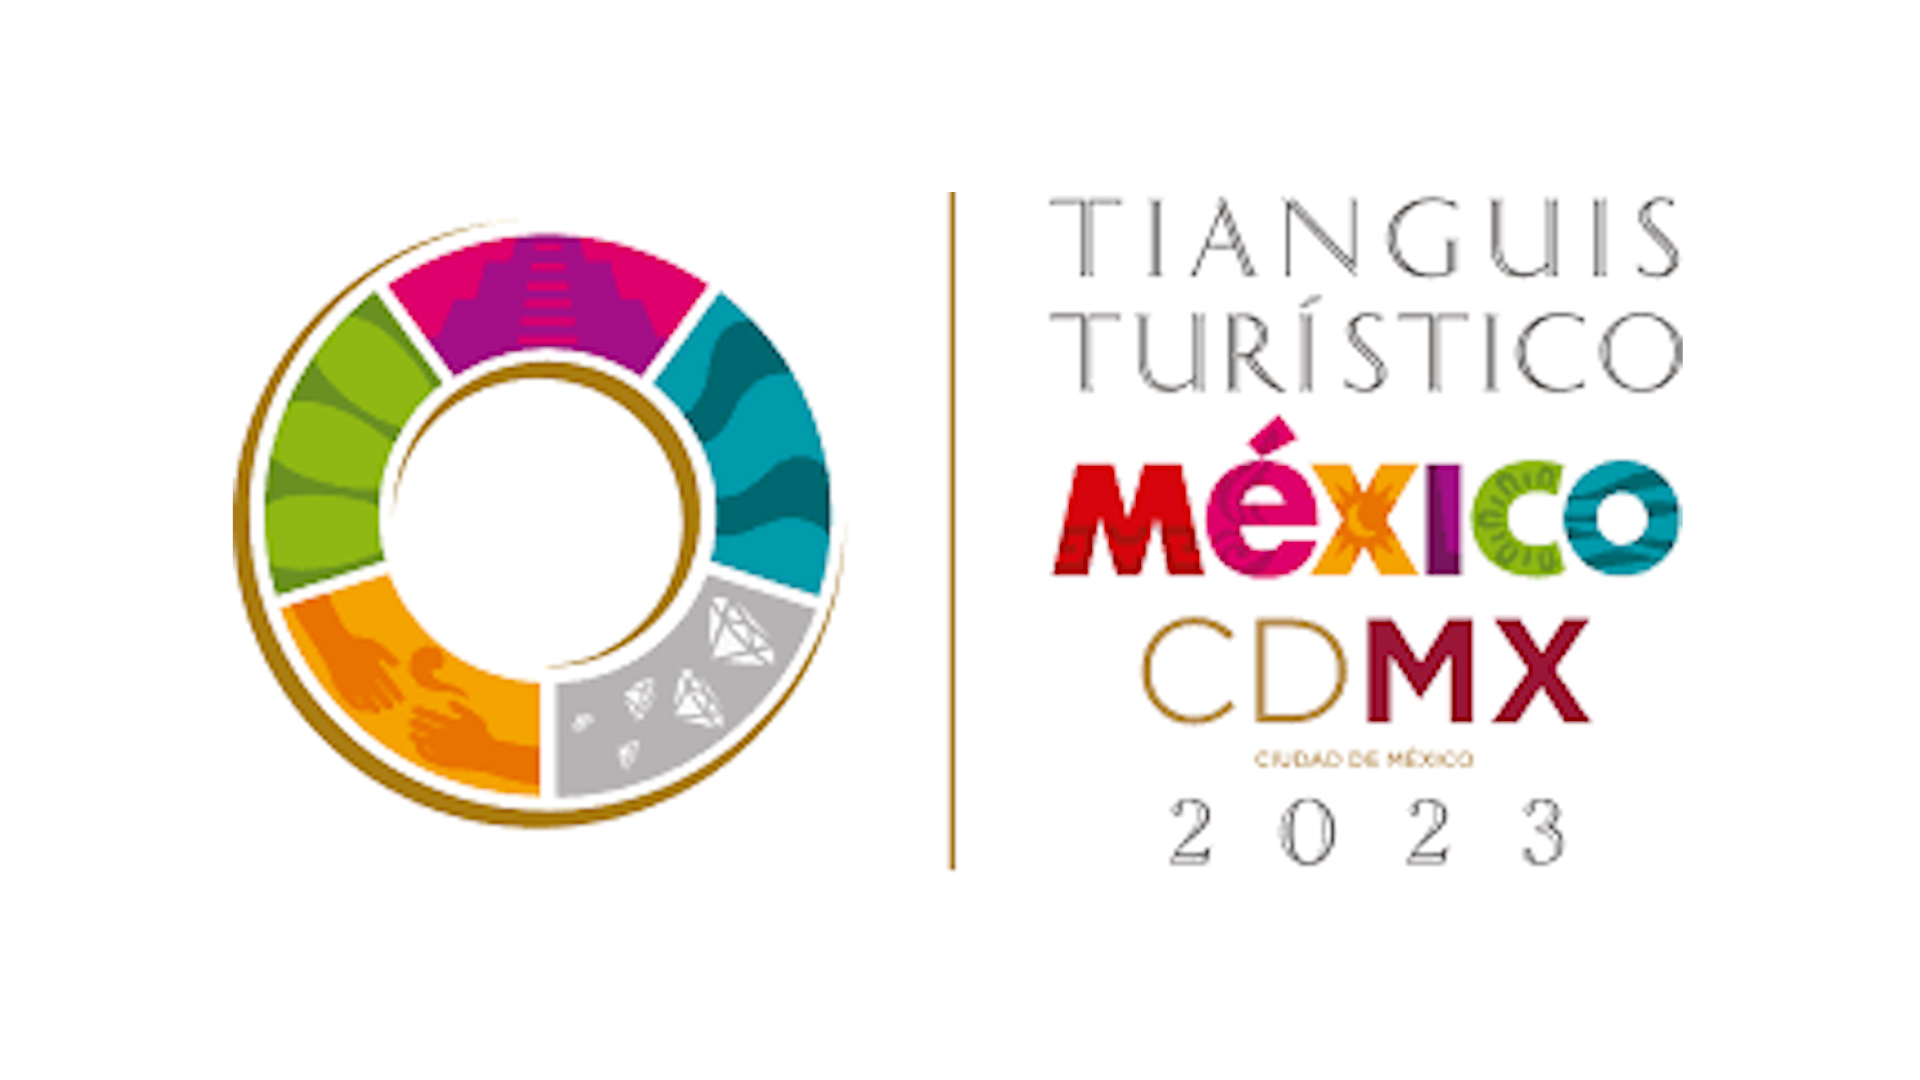 From March 26 to 29 the 47th edition of the Tianguis Turistico CNT 1